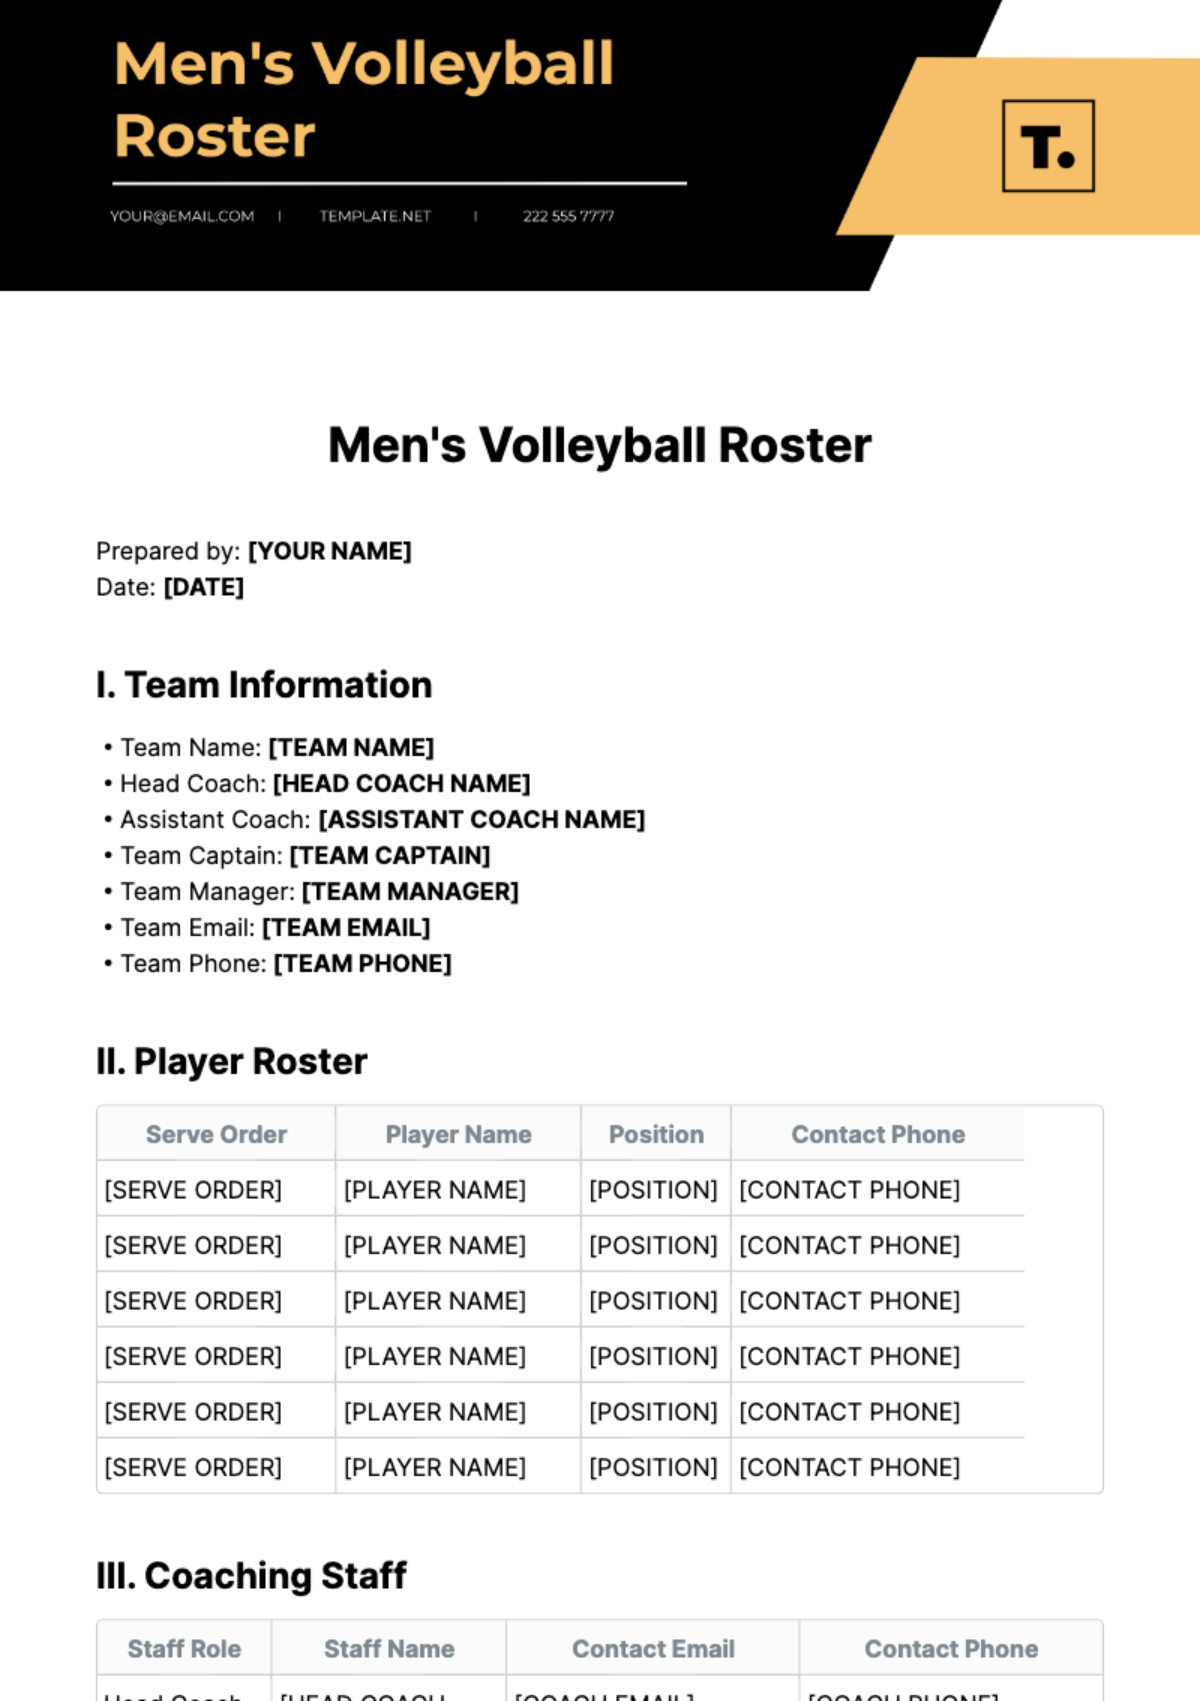 Men's Volleyball Roster Template